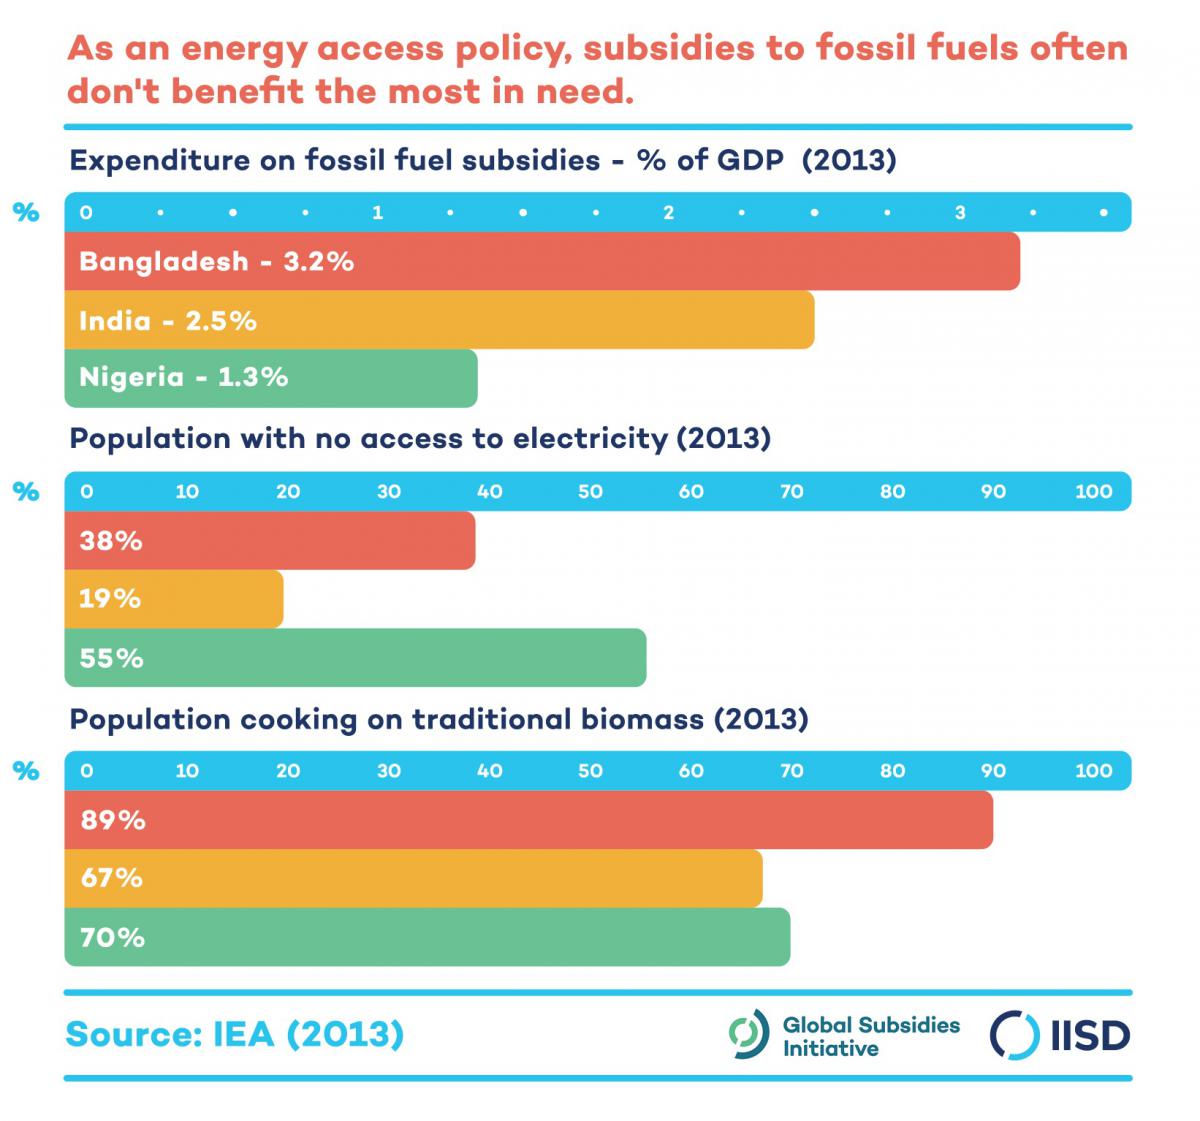 Infographic based on IEA figures from 2013, describing how as an energy access policy, fossil fuel subsidies often don't benefit the most in need